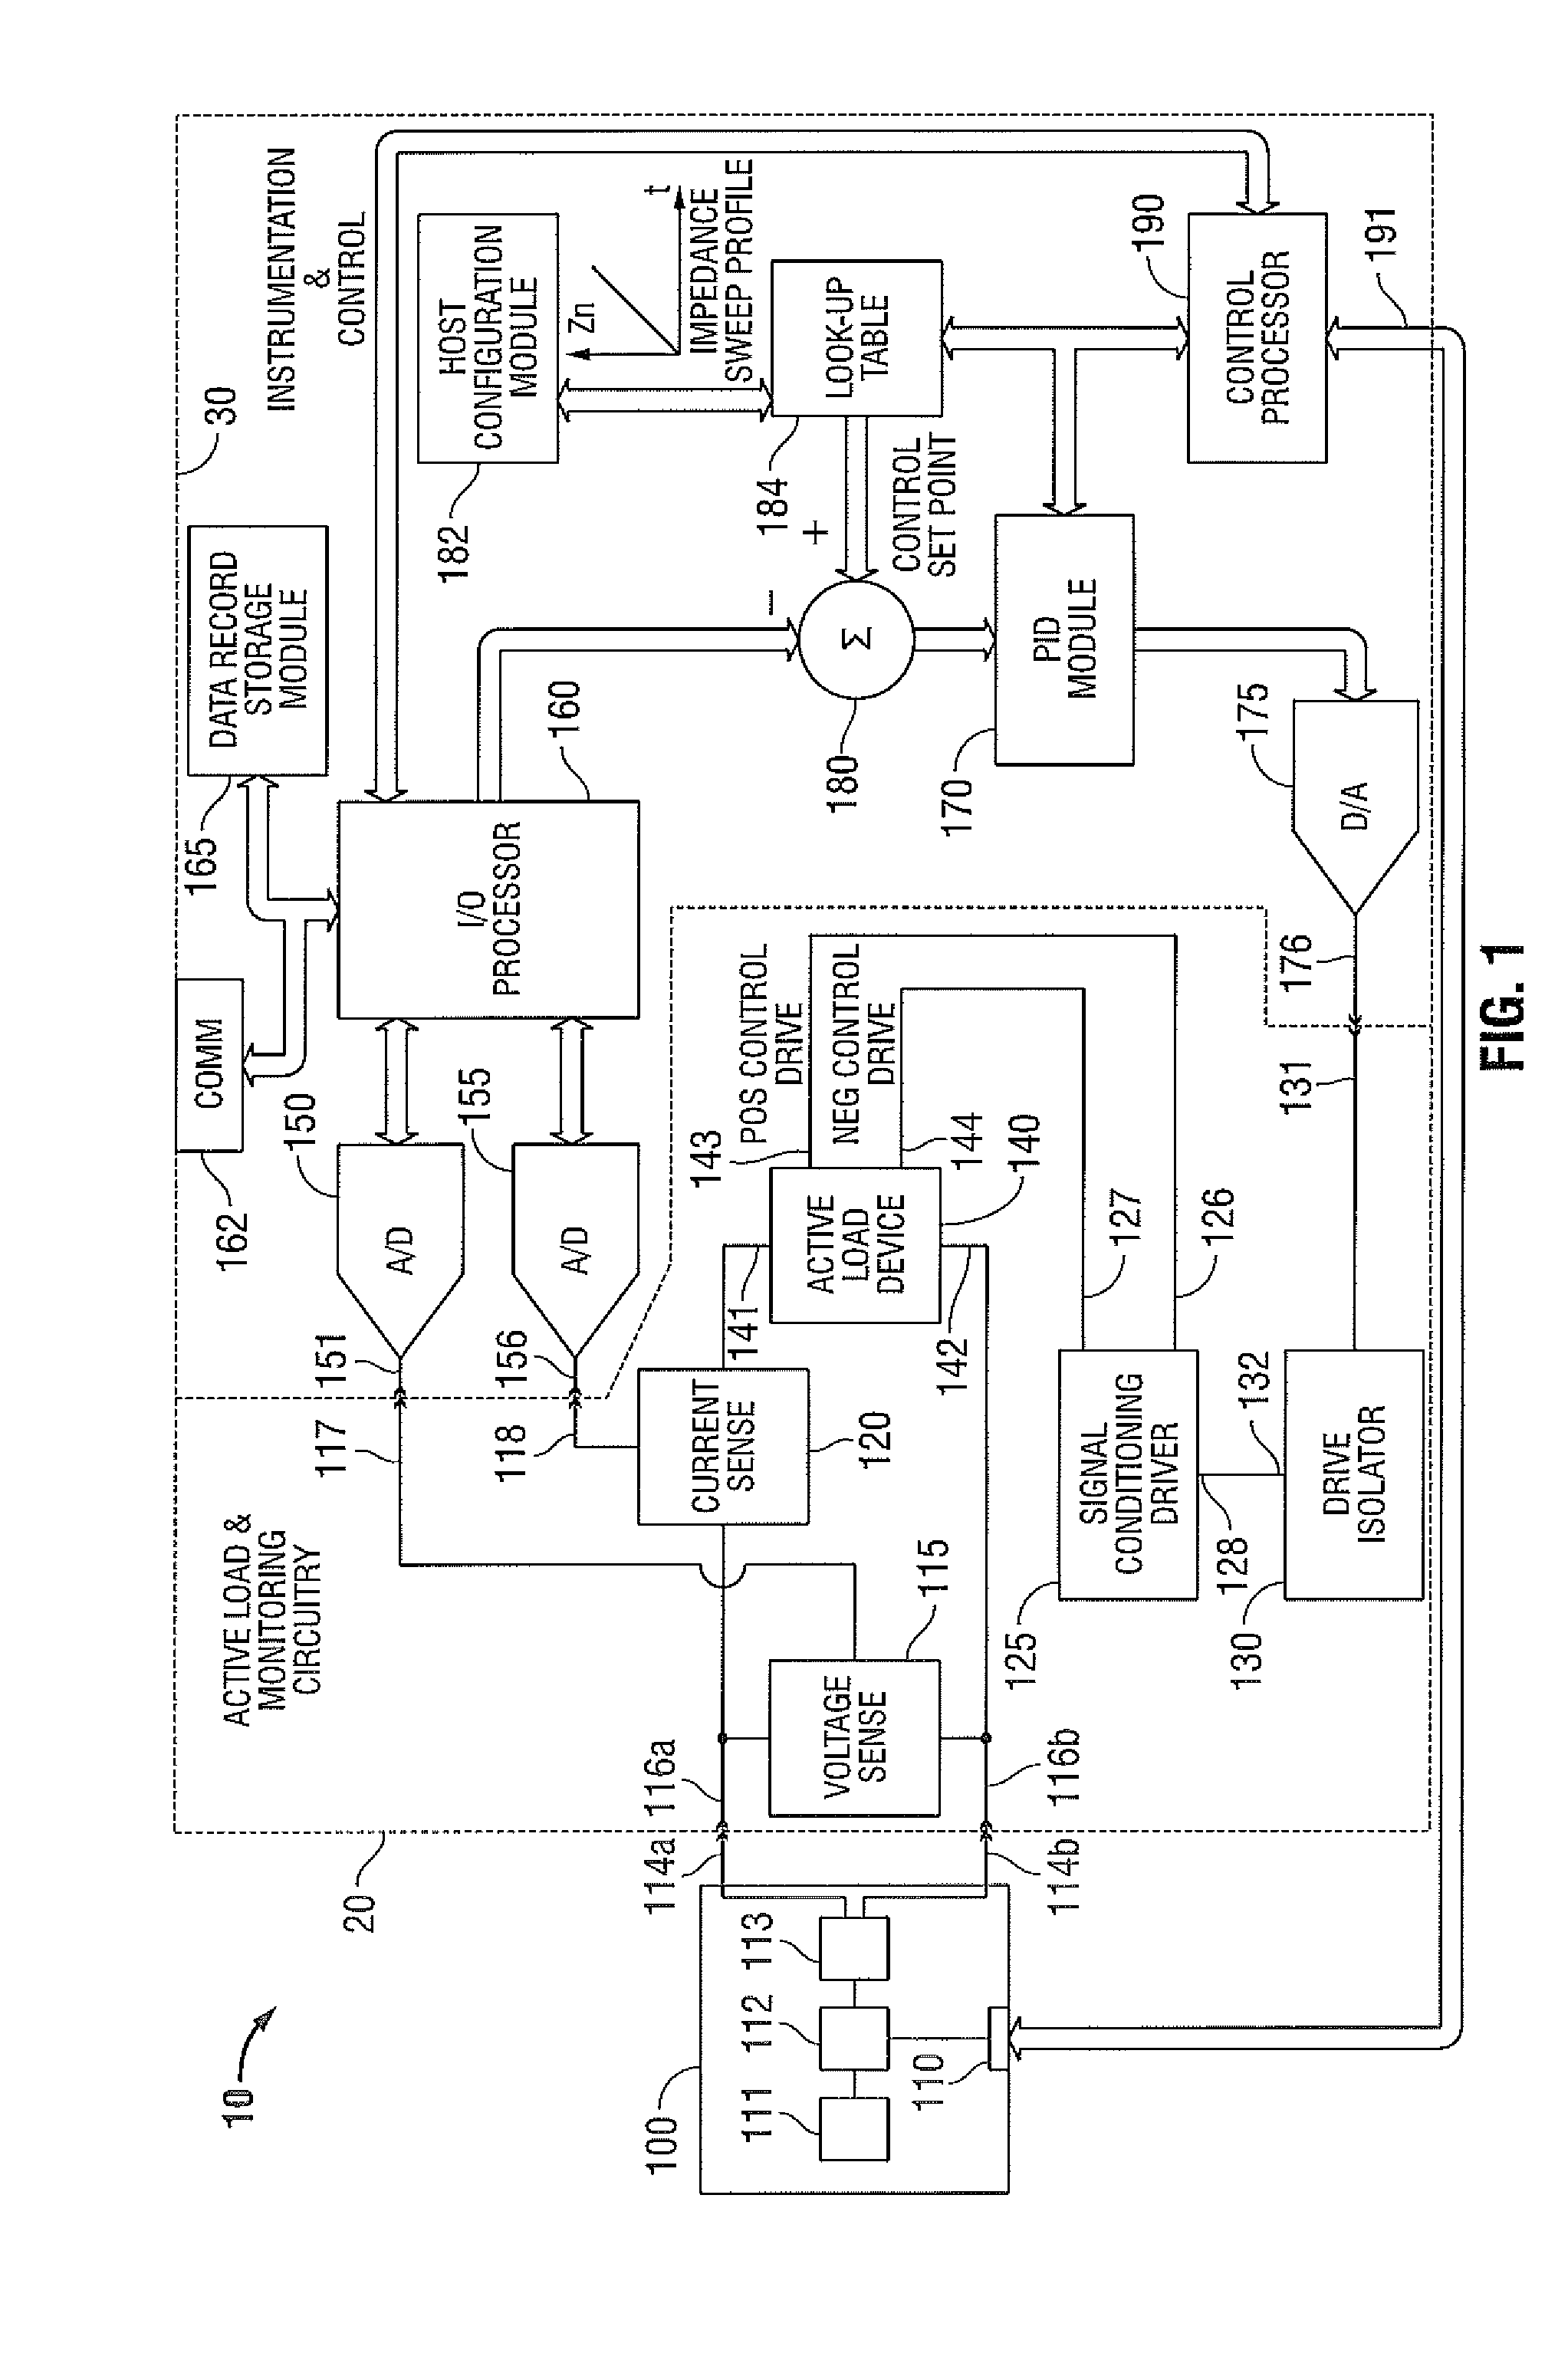 System and Method for Electrosurgical Generator Power Measurement